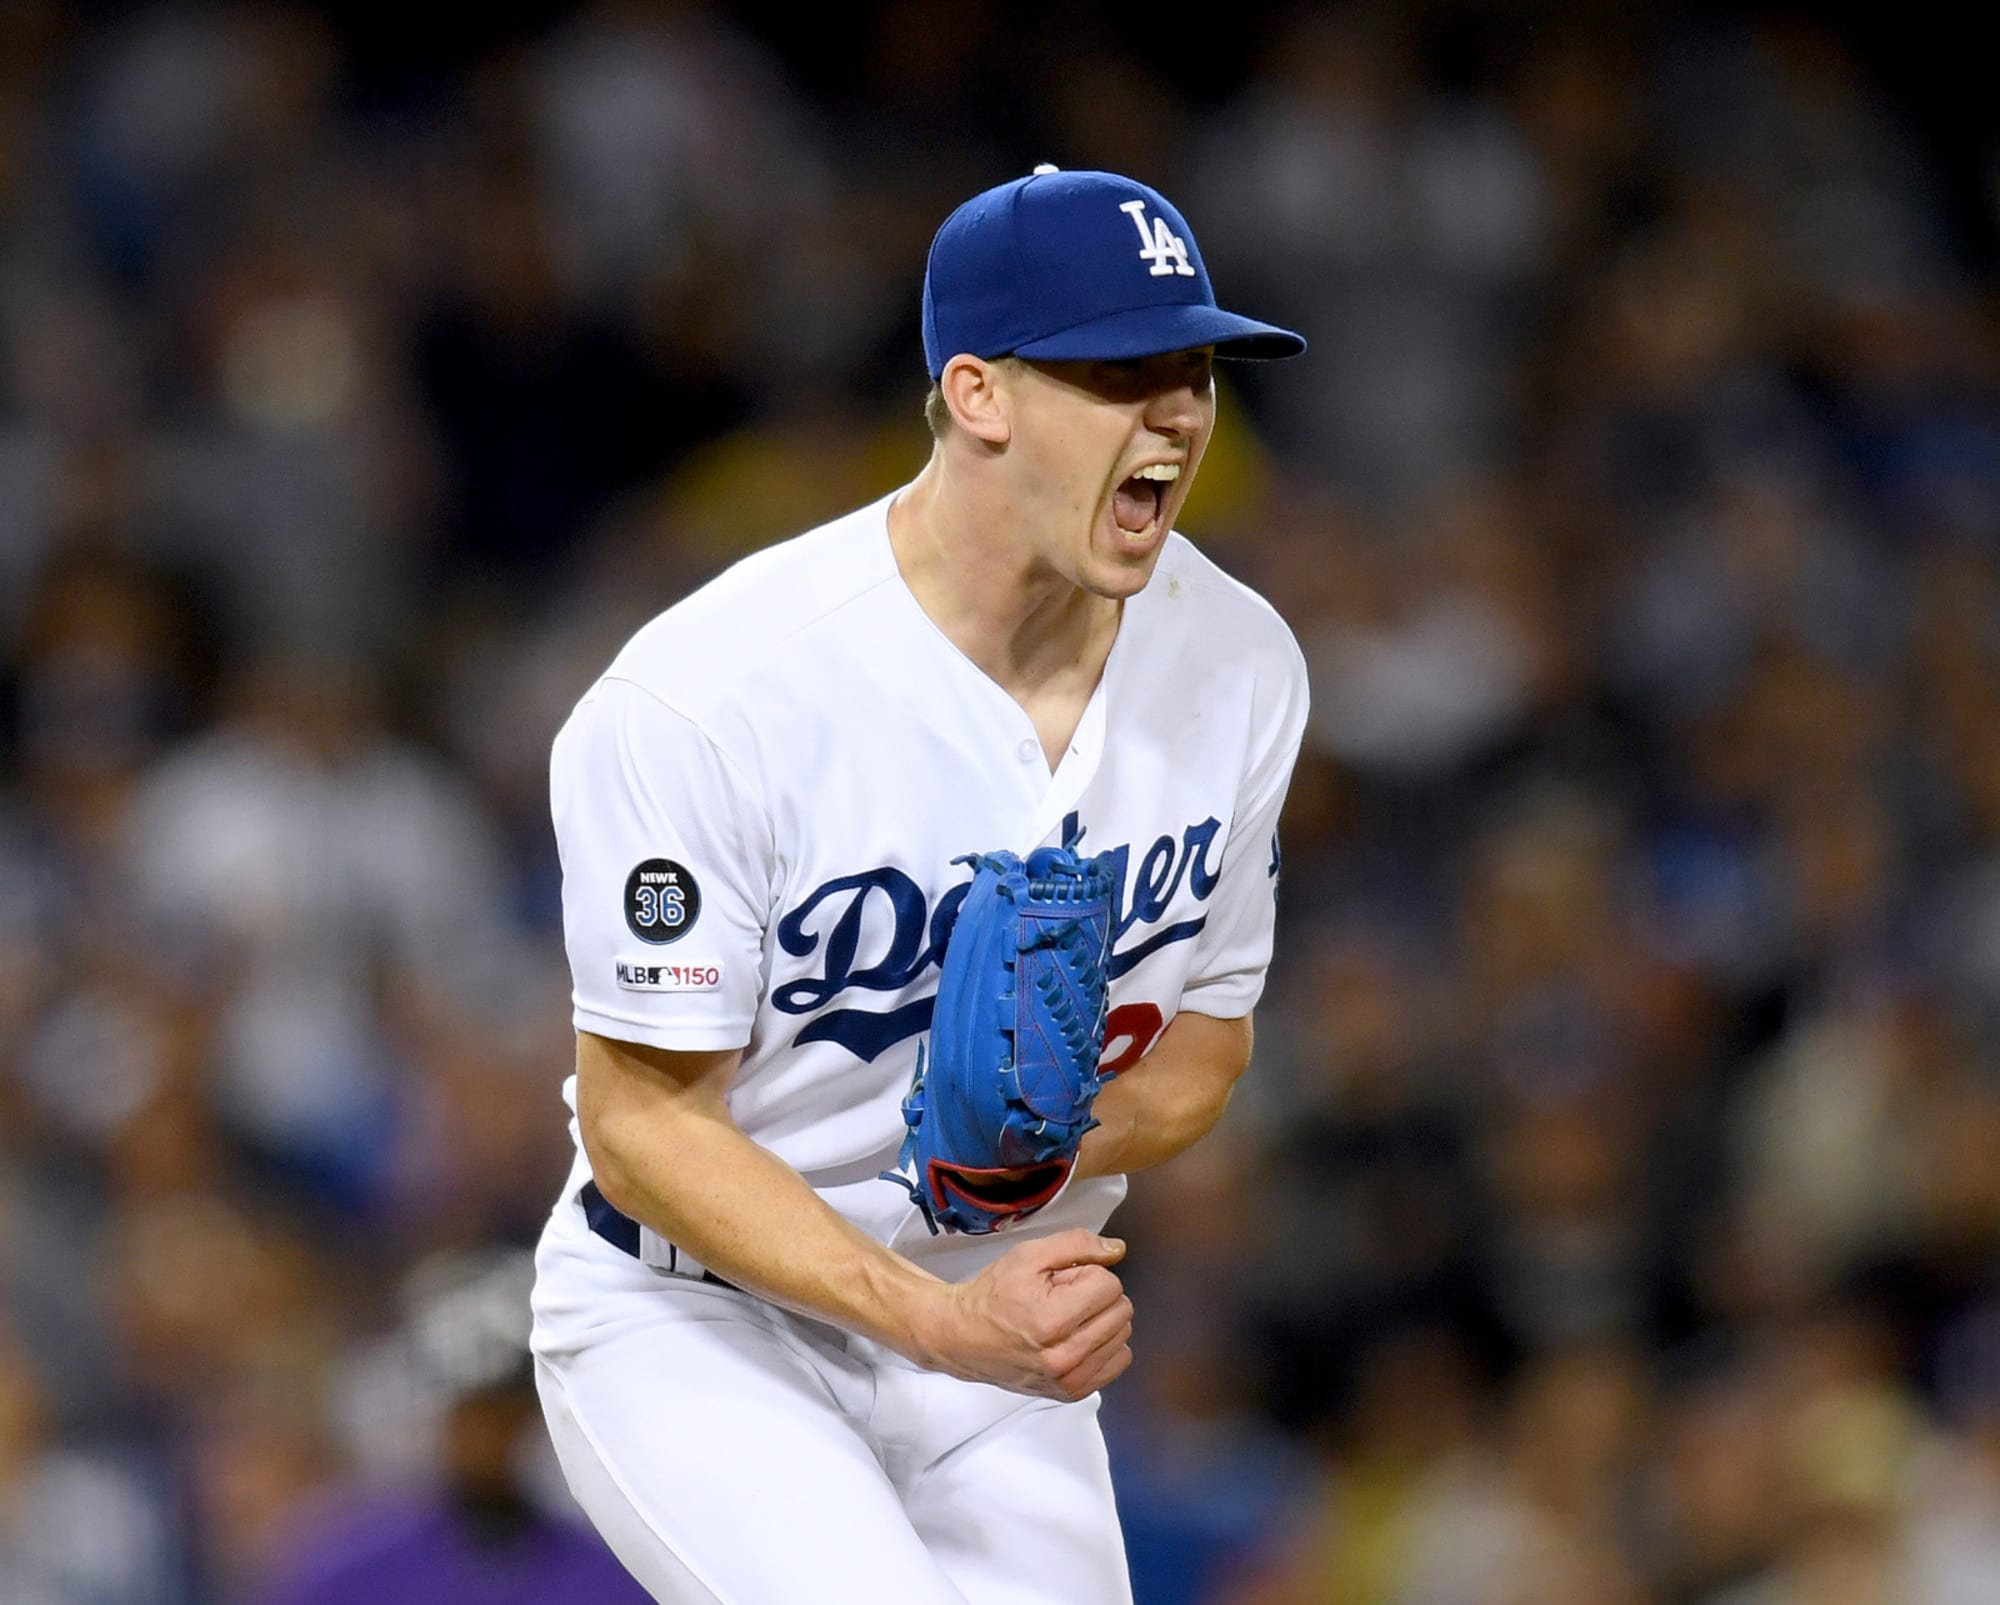 Los Angeles Dodgers: Momentum is building after crazy win